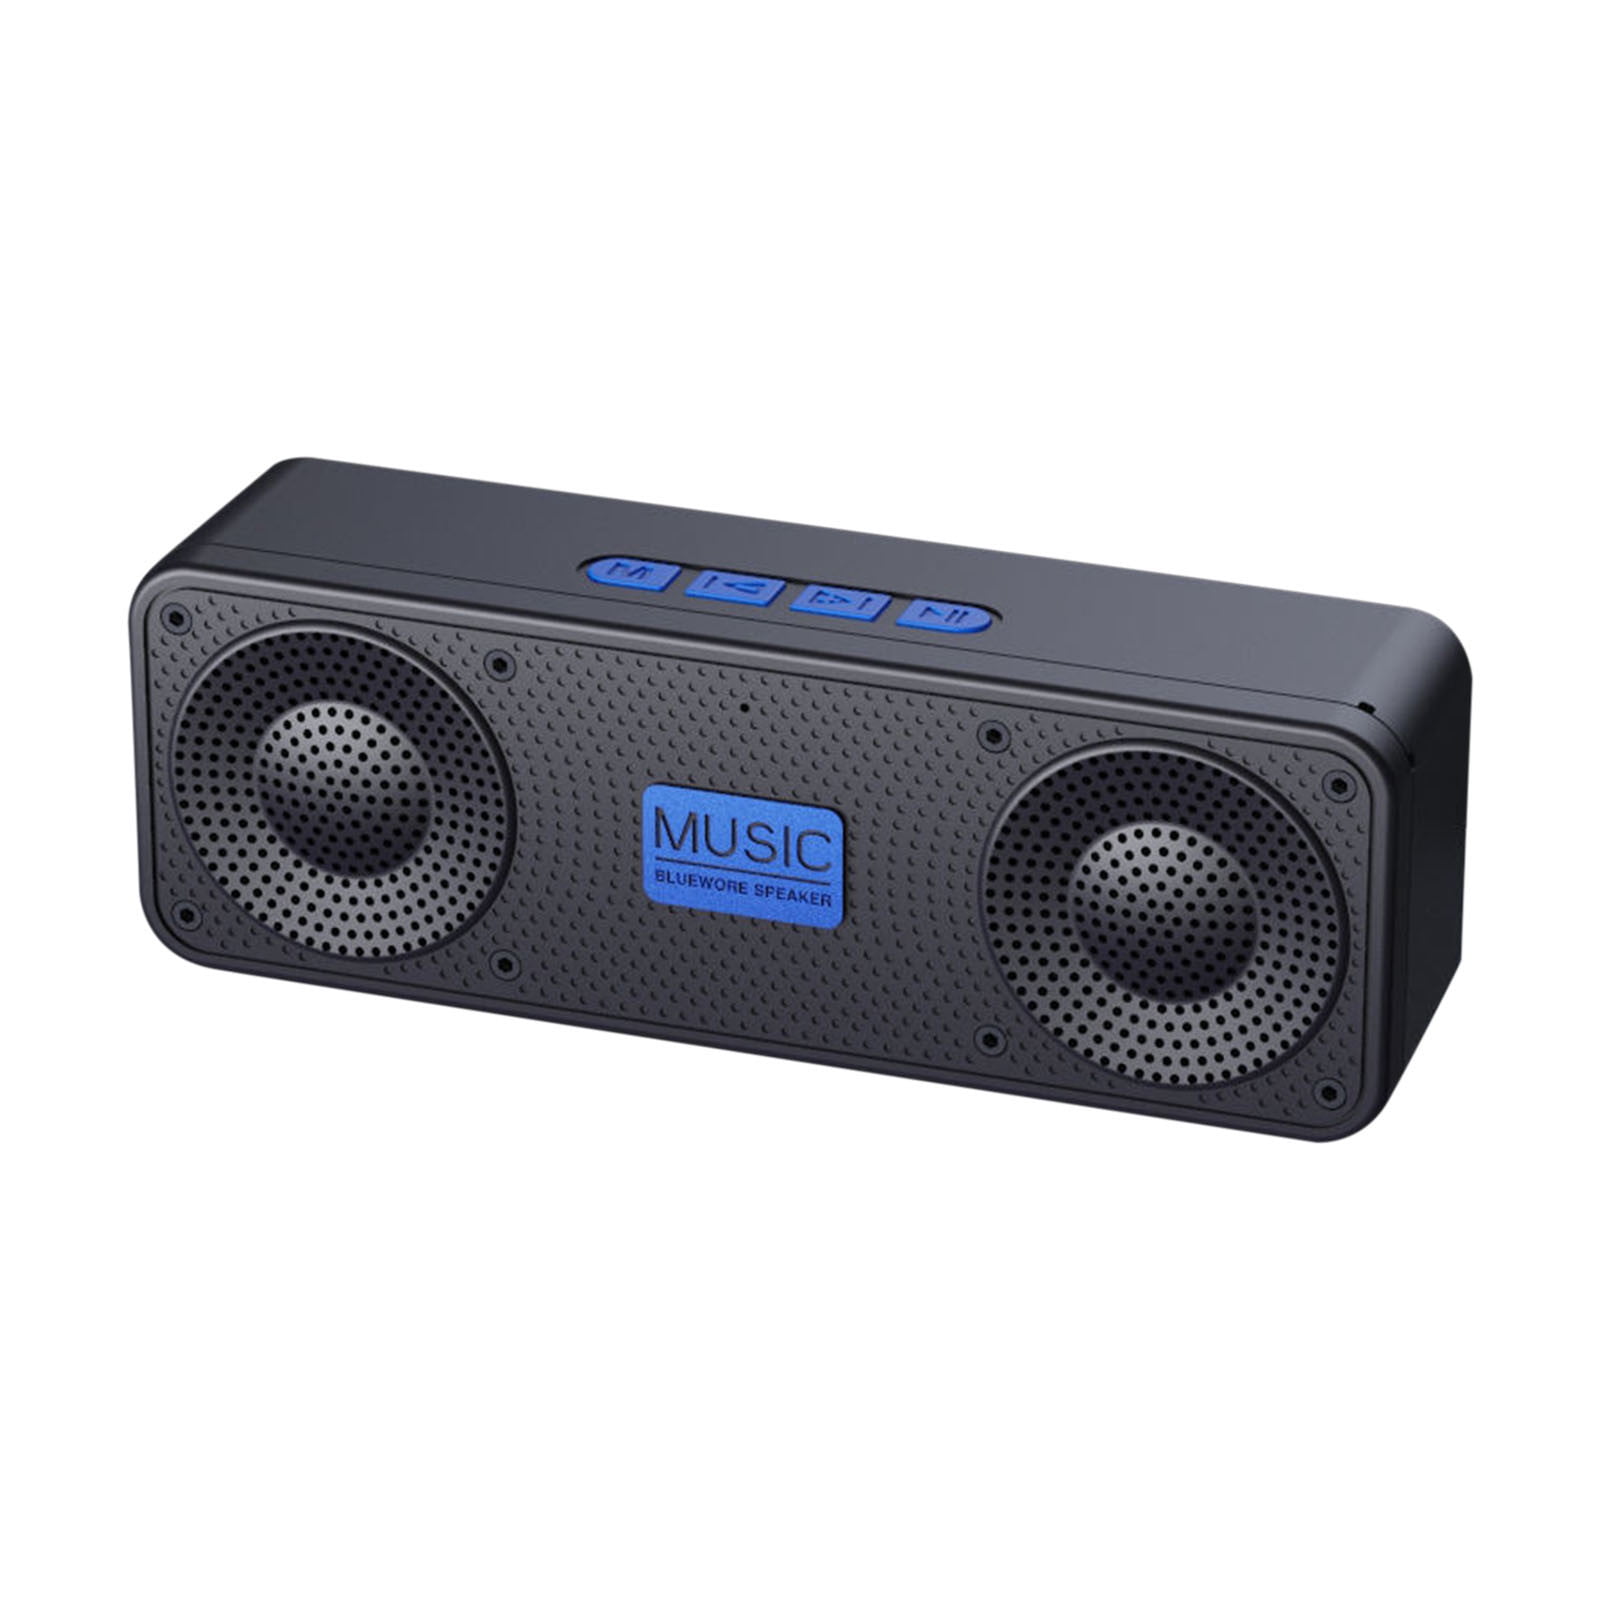 amlbb Bluetooth Speakers S18 Wireless Bluetooth Speaker Outdoor Portable  Subwoofer Radio Small Sound on Clearance